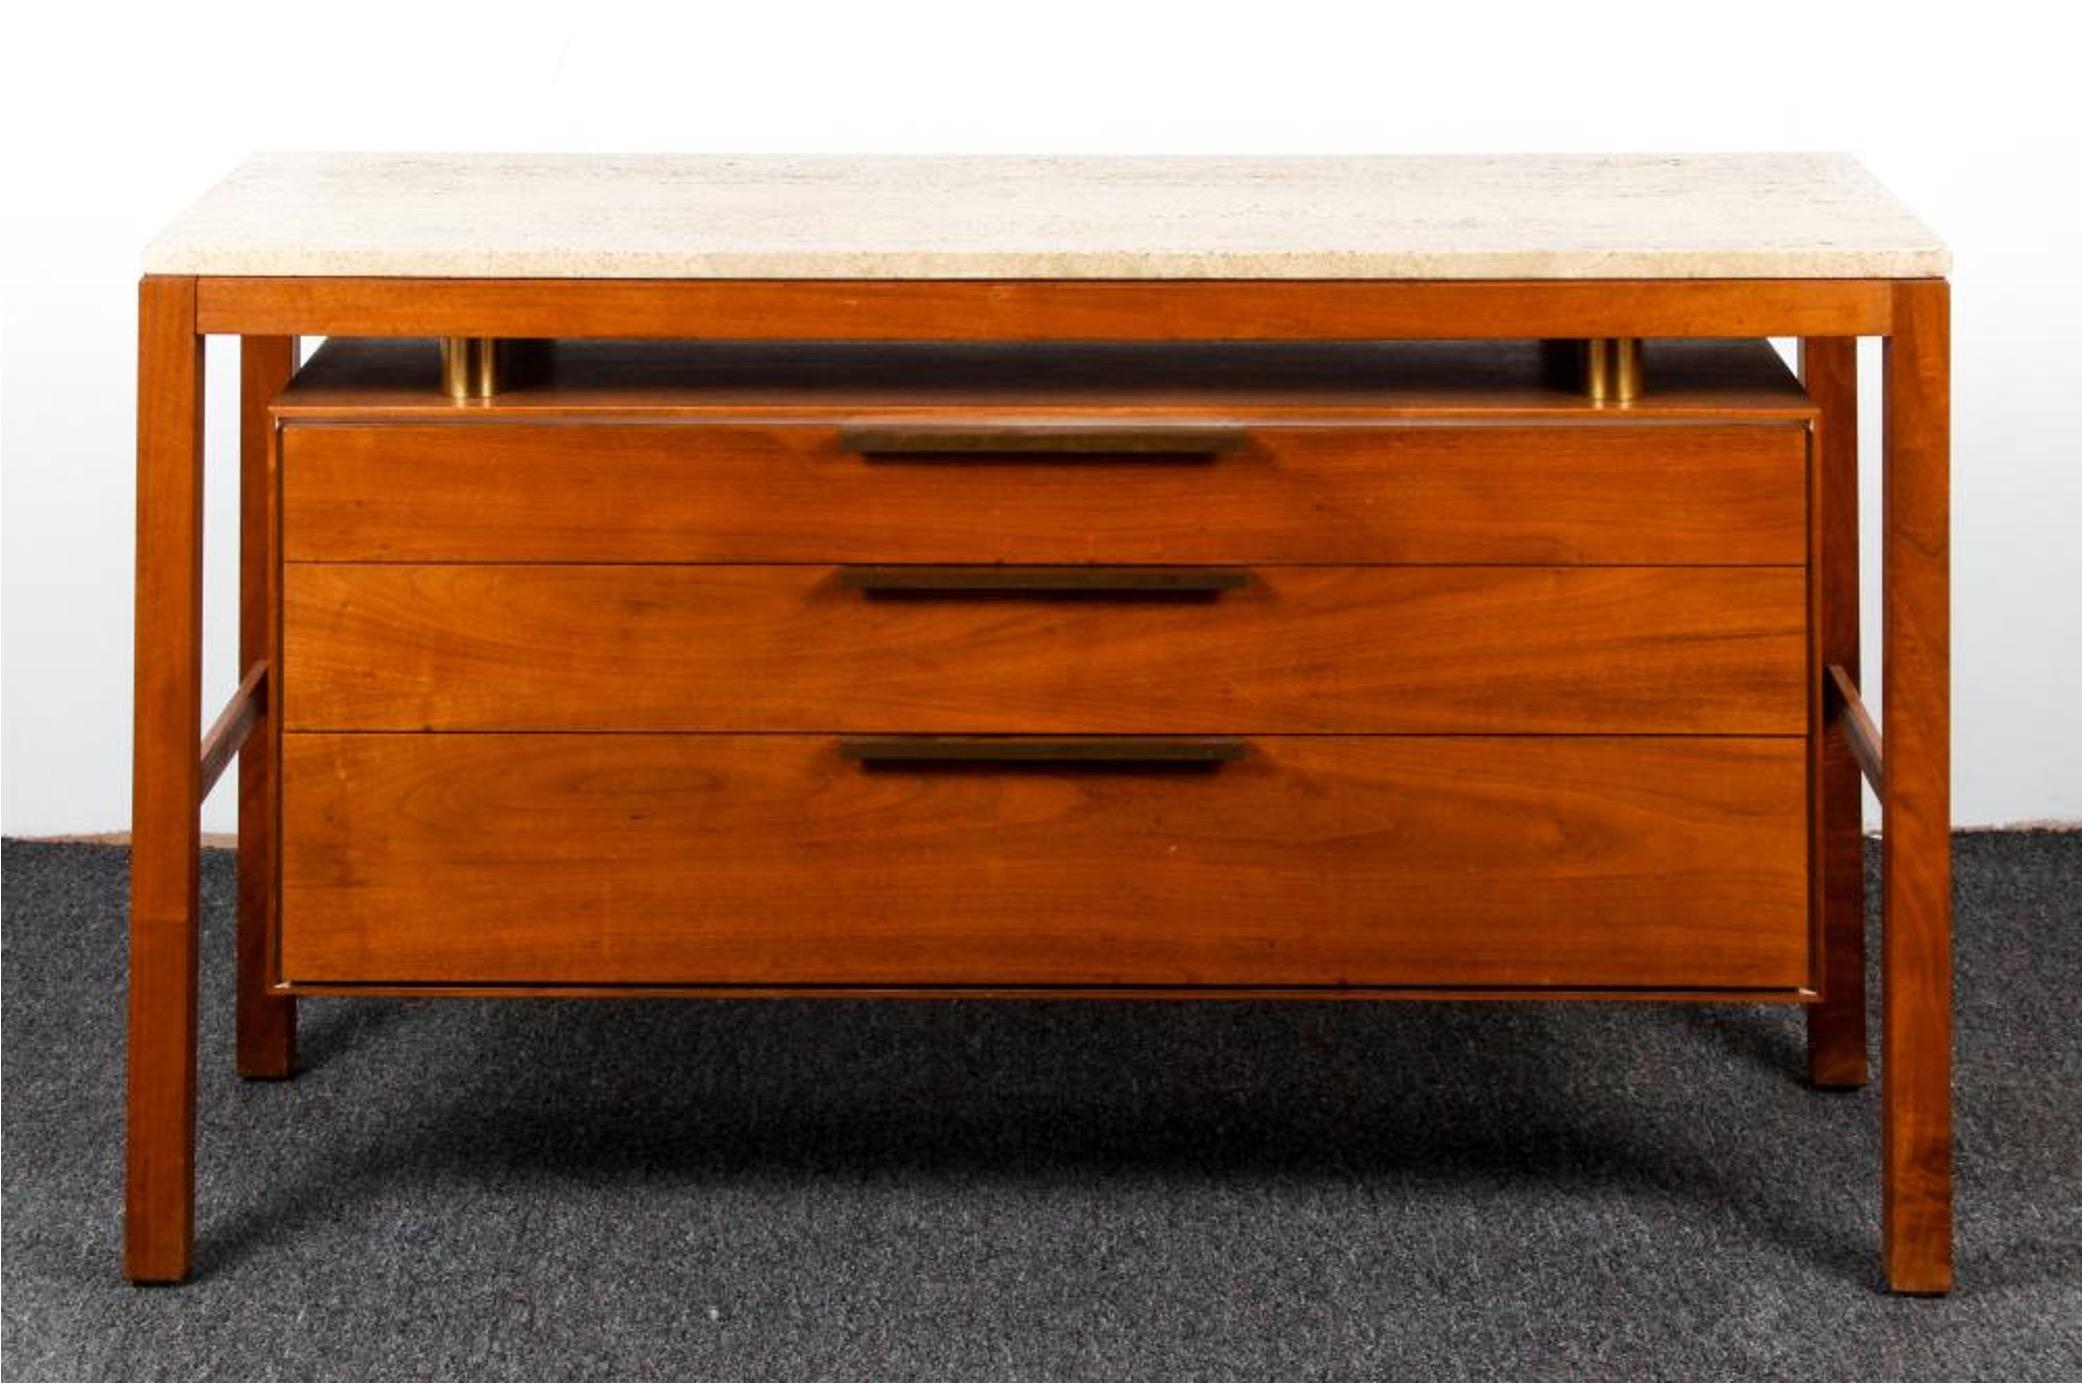 Pair of custom Mid-Century Modern sideboards / cabinets by, Vladimir Kagan in 1961. Made of walnut, with travertine tops, original brass pulls. It was purchased directly from Kagan-Dreyfuss by an old Pittsburgh family, which include the original